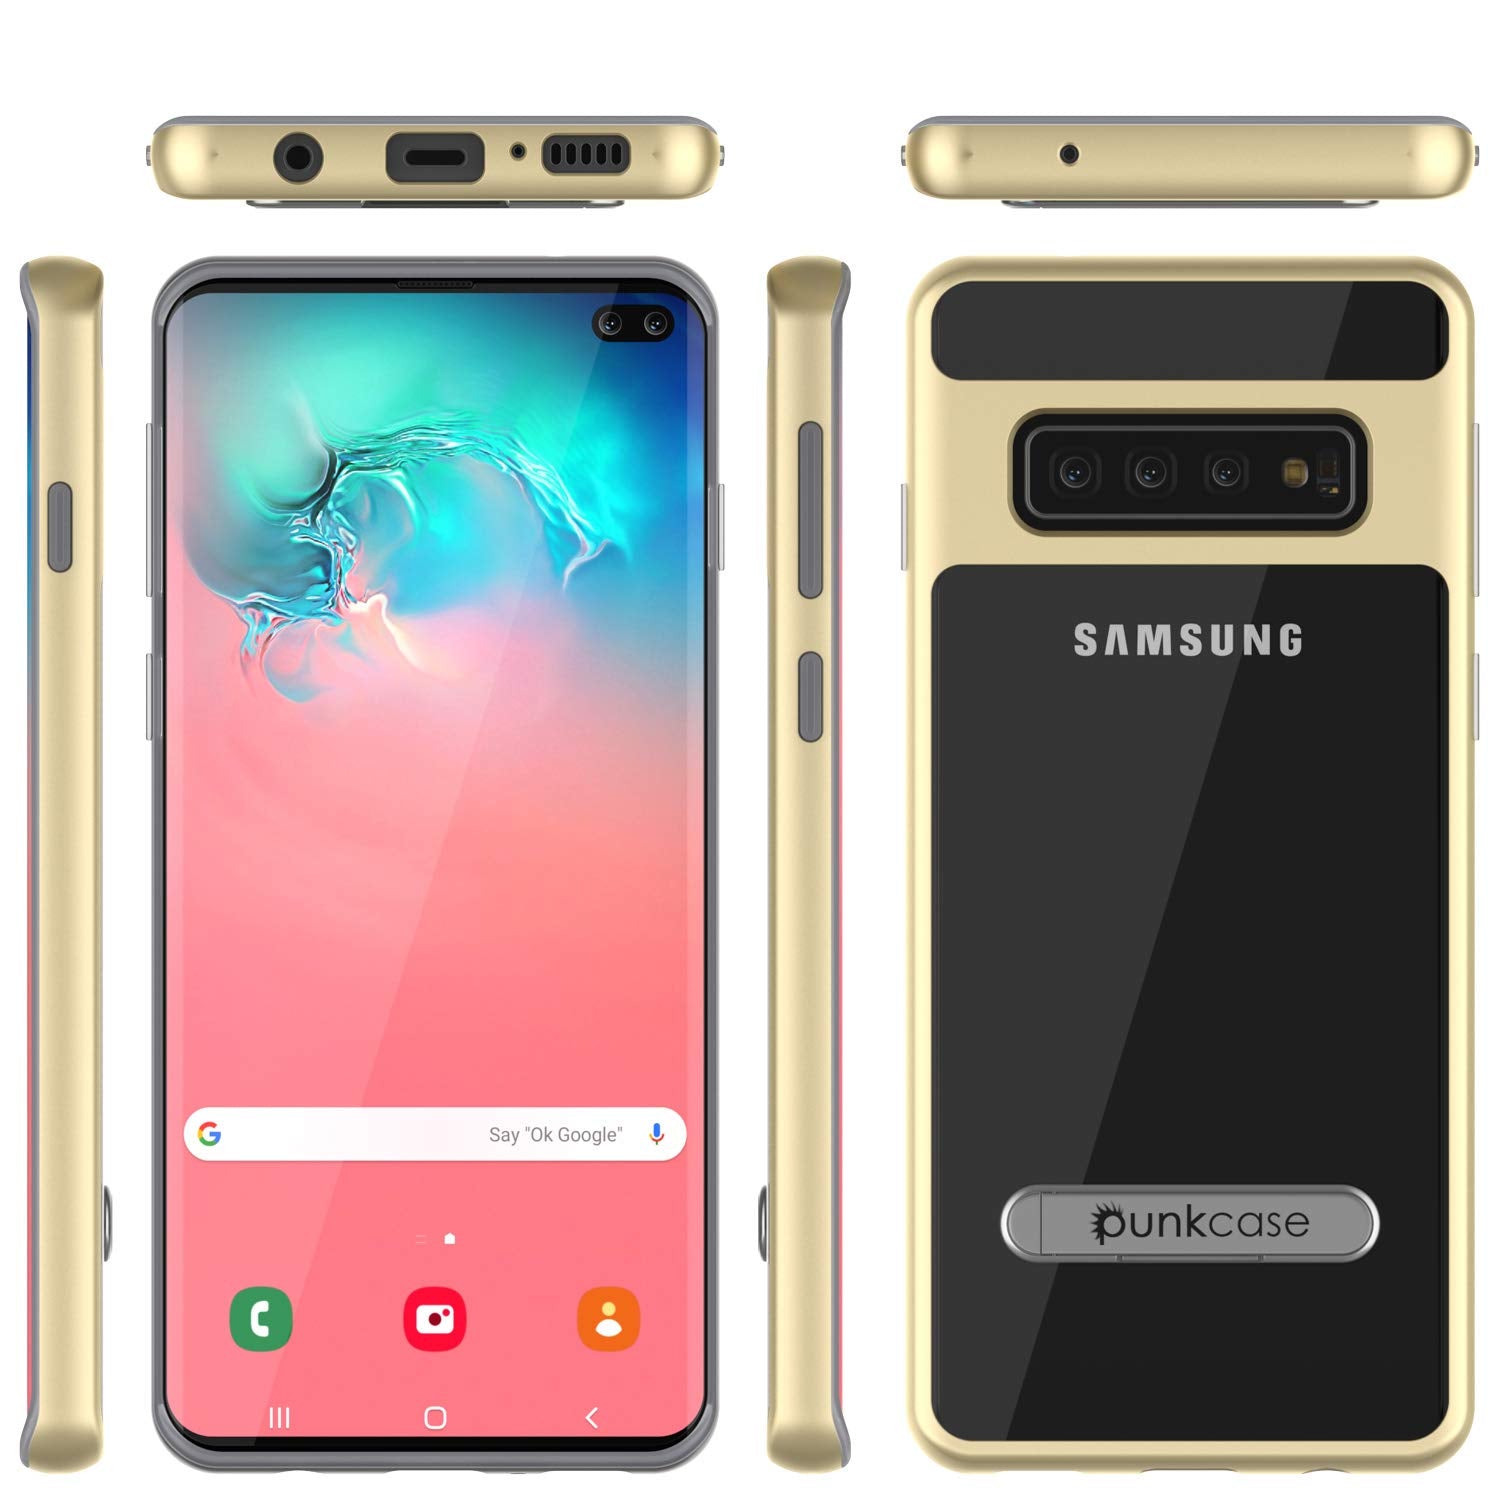 Galaxy S10+ Plus Case, PUNKcase [LUCID 3.0 Series] [Slim Fit] Armor Cover w/ Integrated Screen Protector [Gold]